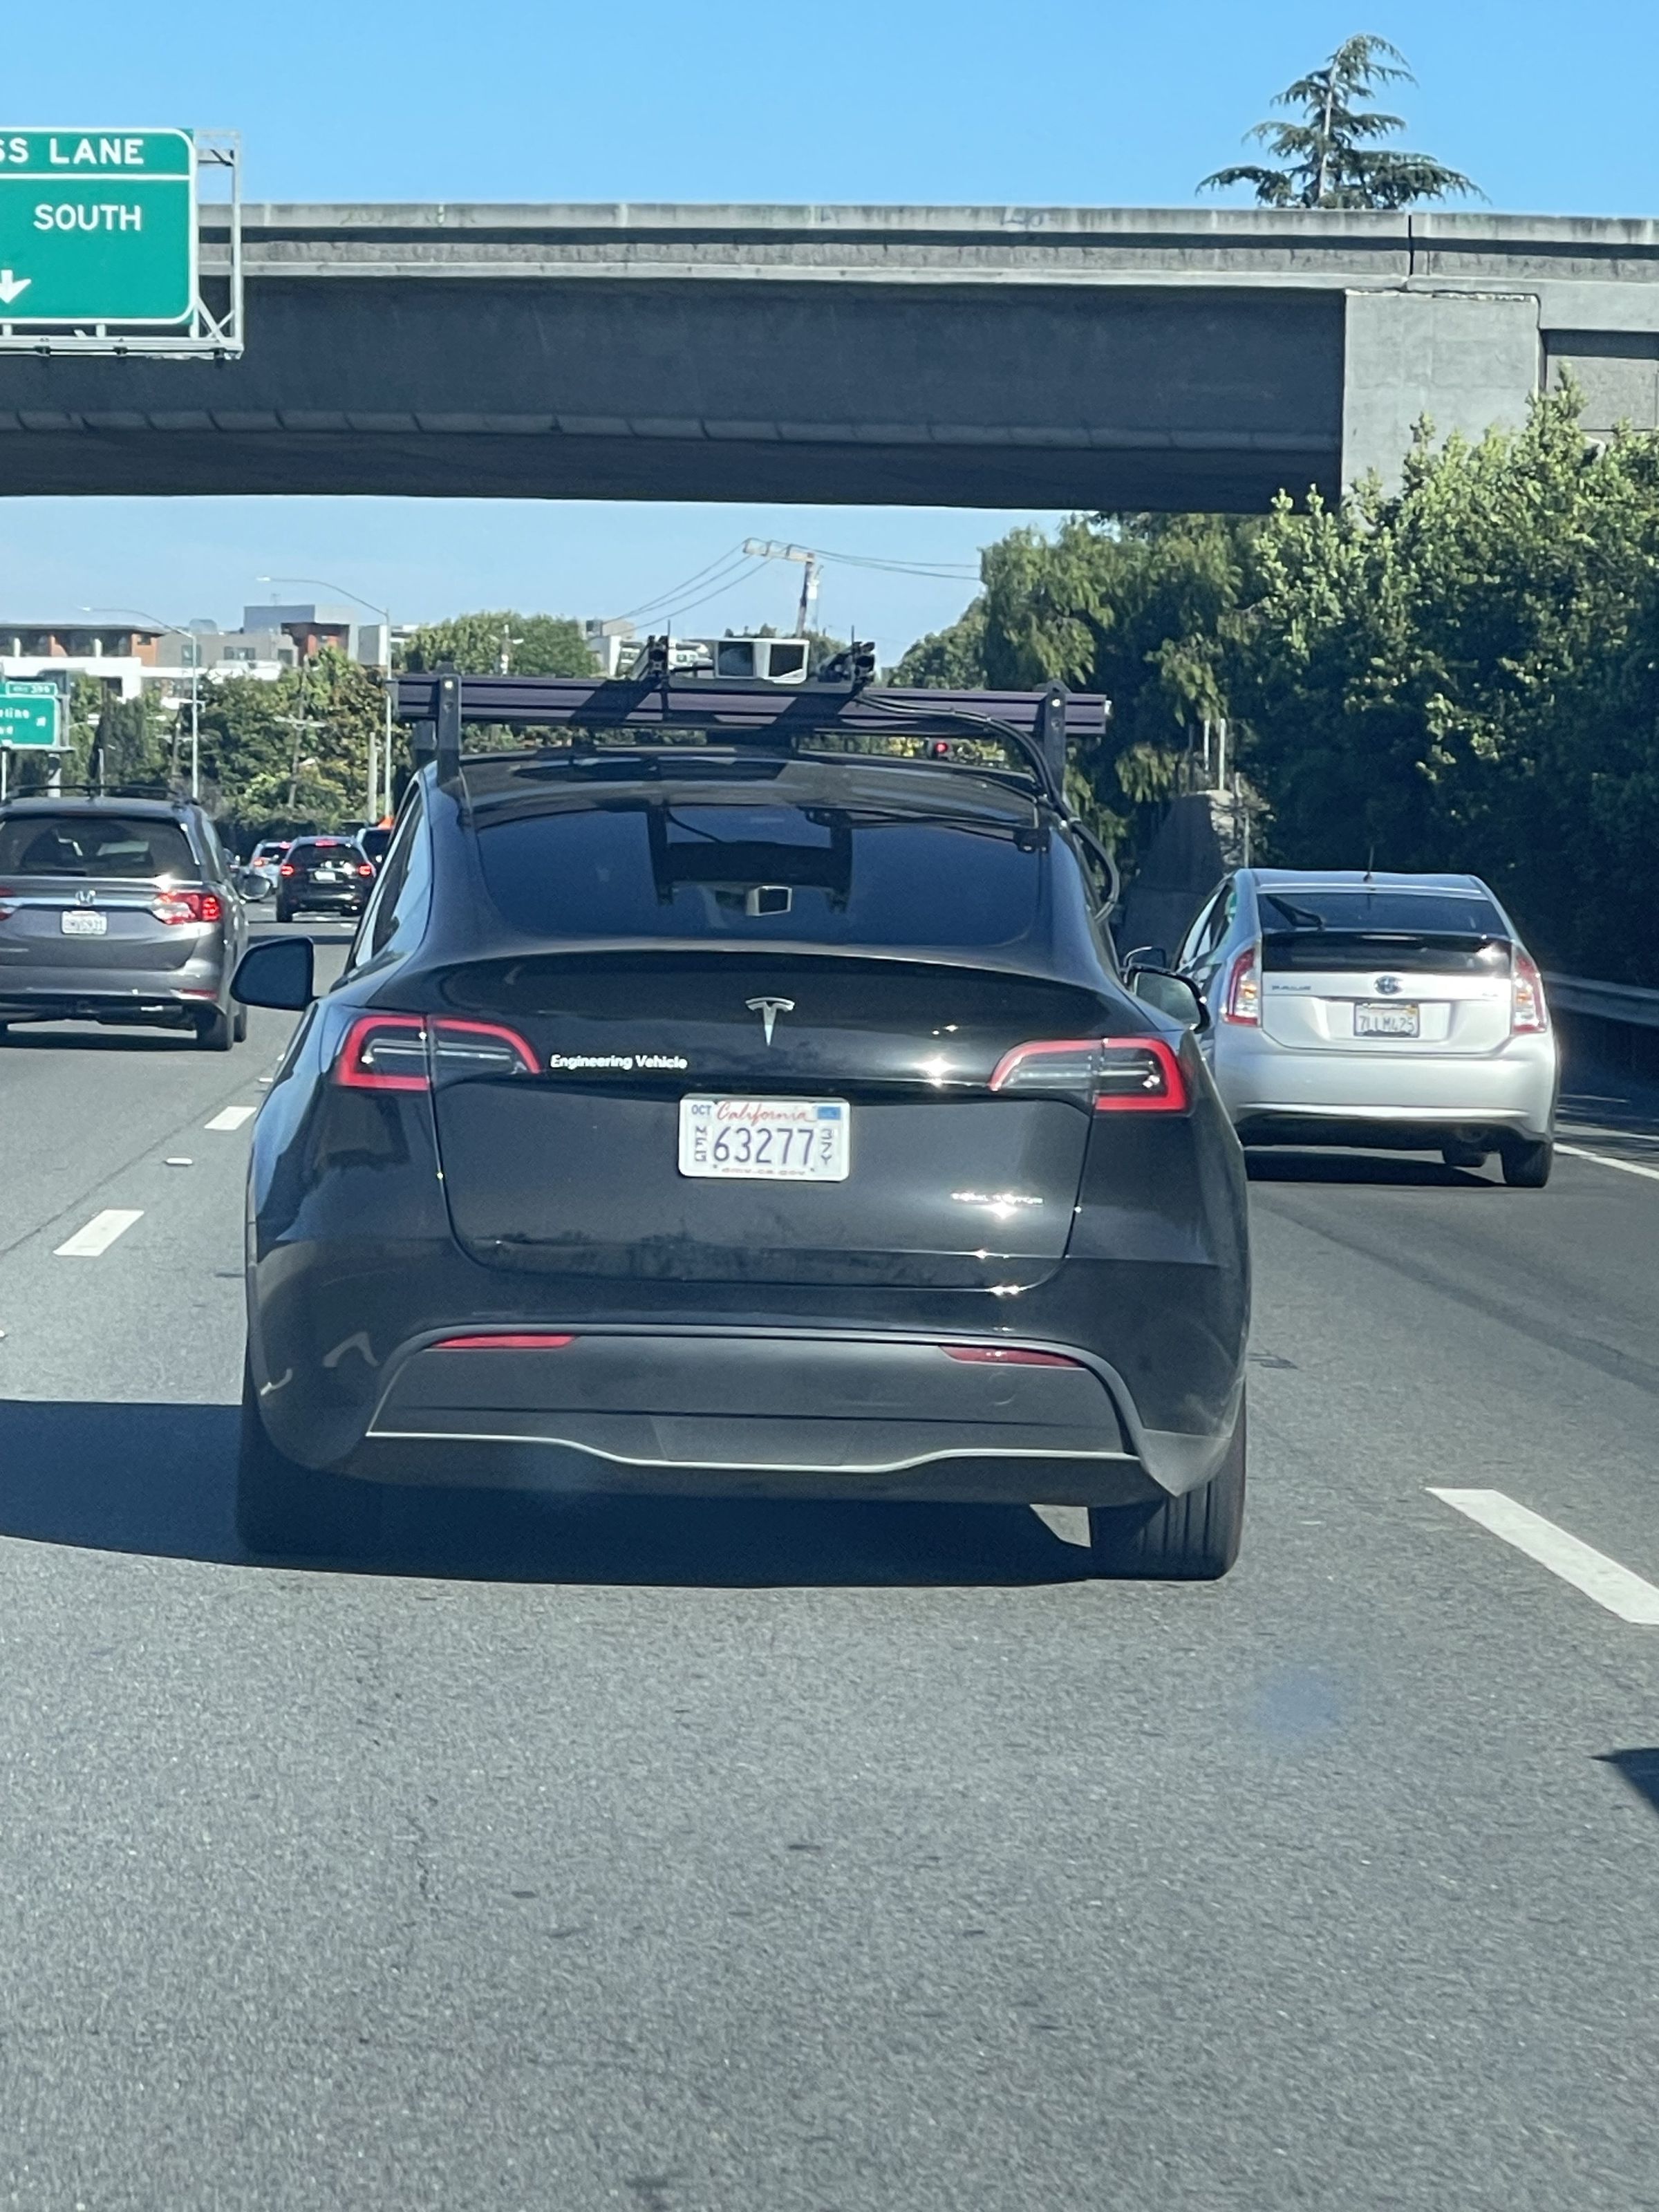 This Tesla was spotted heading southbound on Highway 101 in Mountain View on June 18th. 